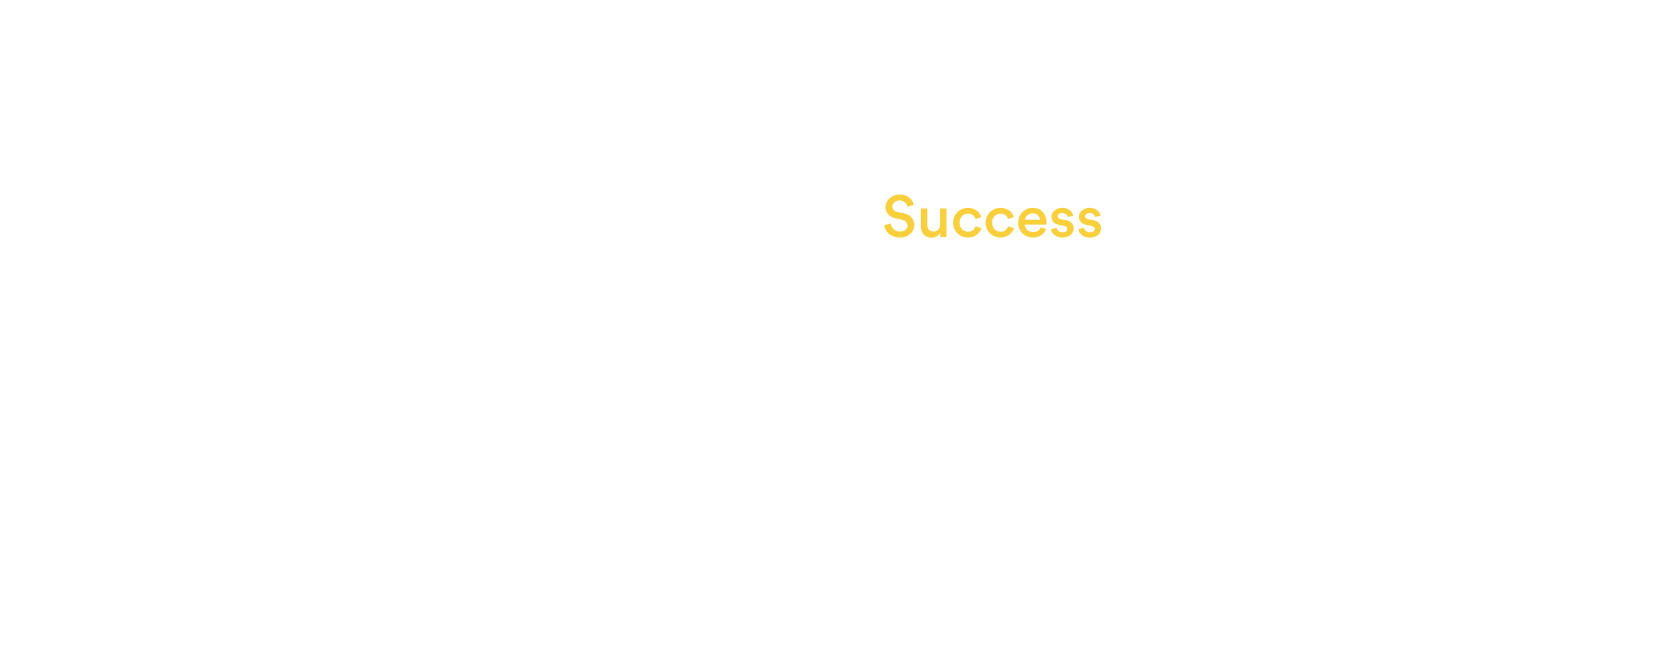 How ProSight Insurance Centralized SOX & Audit to Save 600 Admin Hours